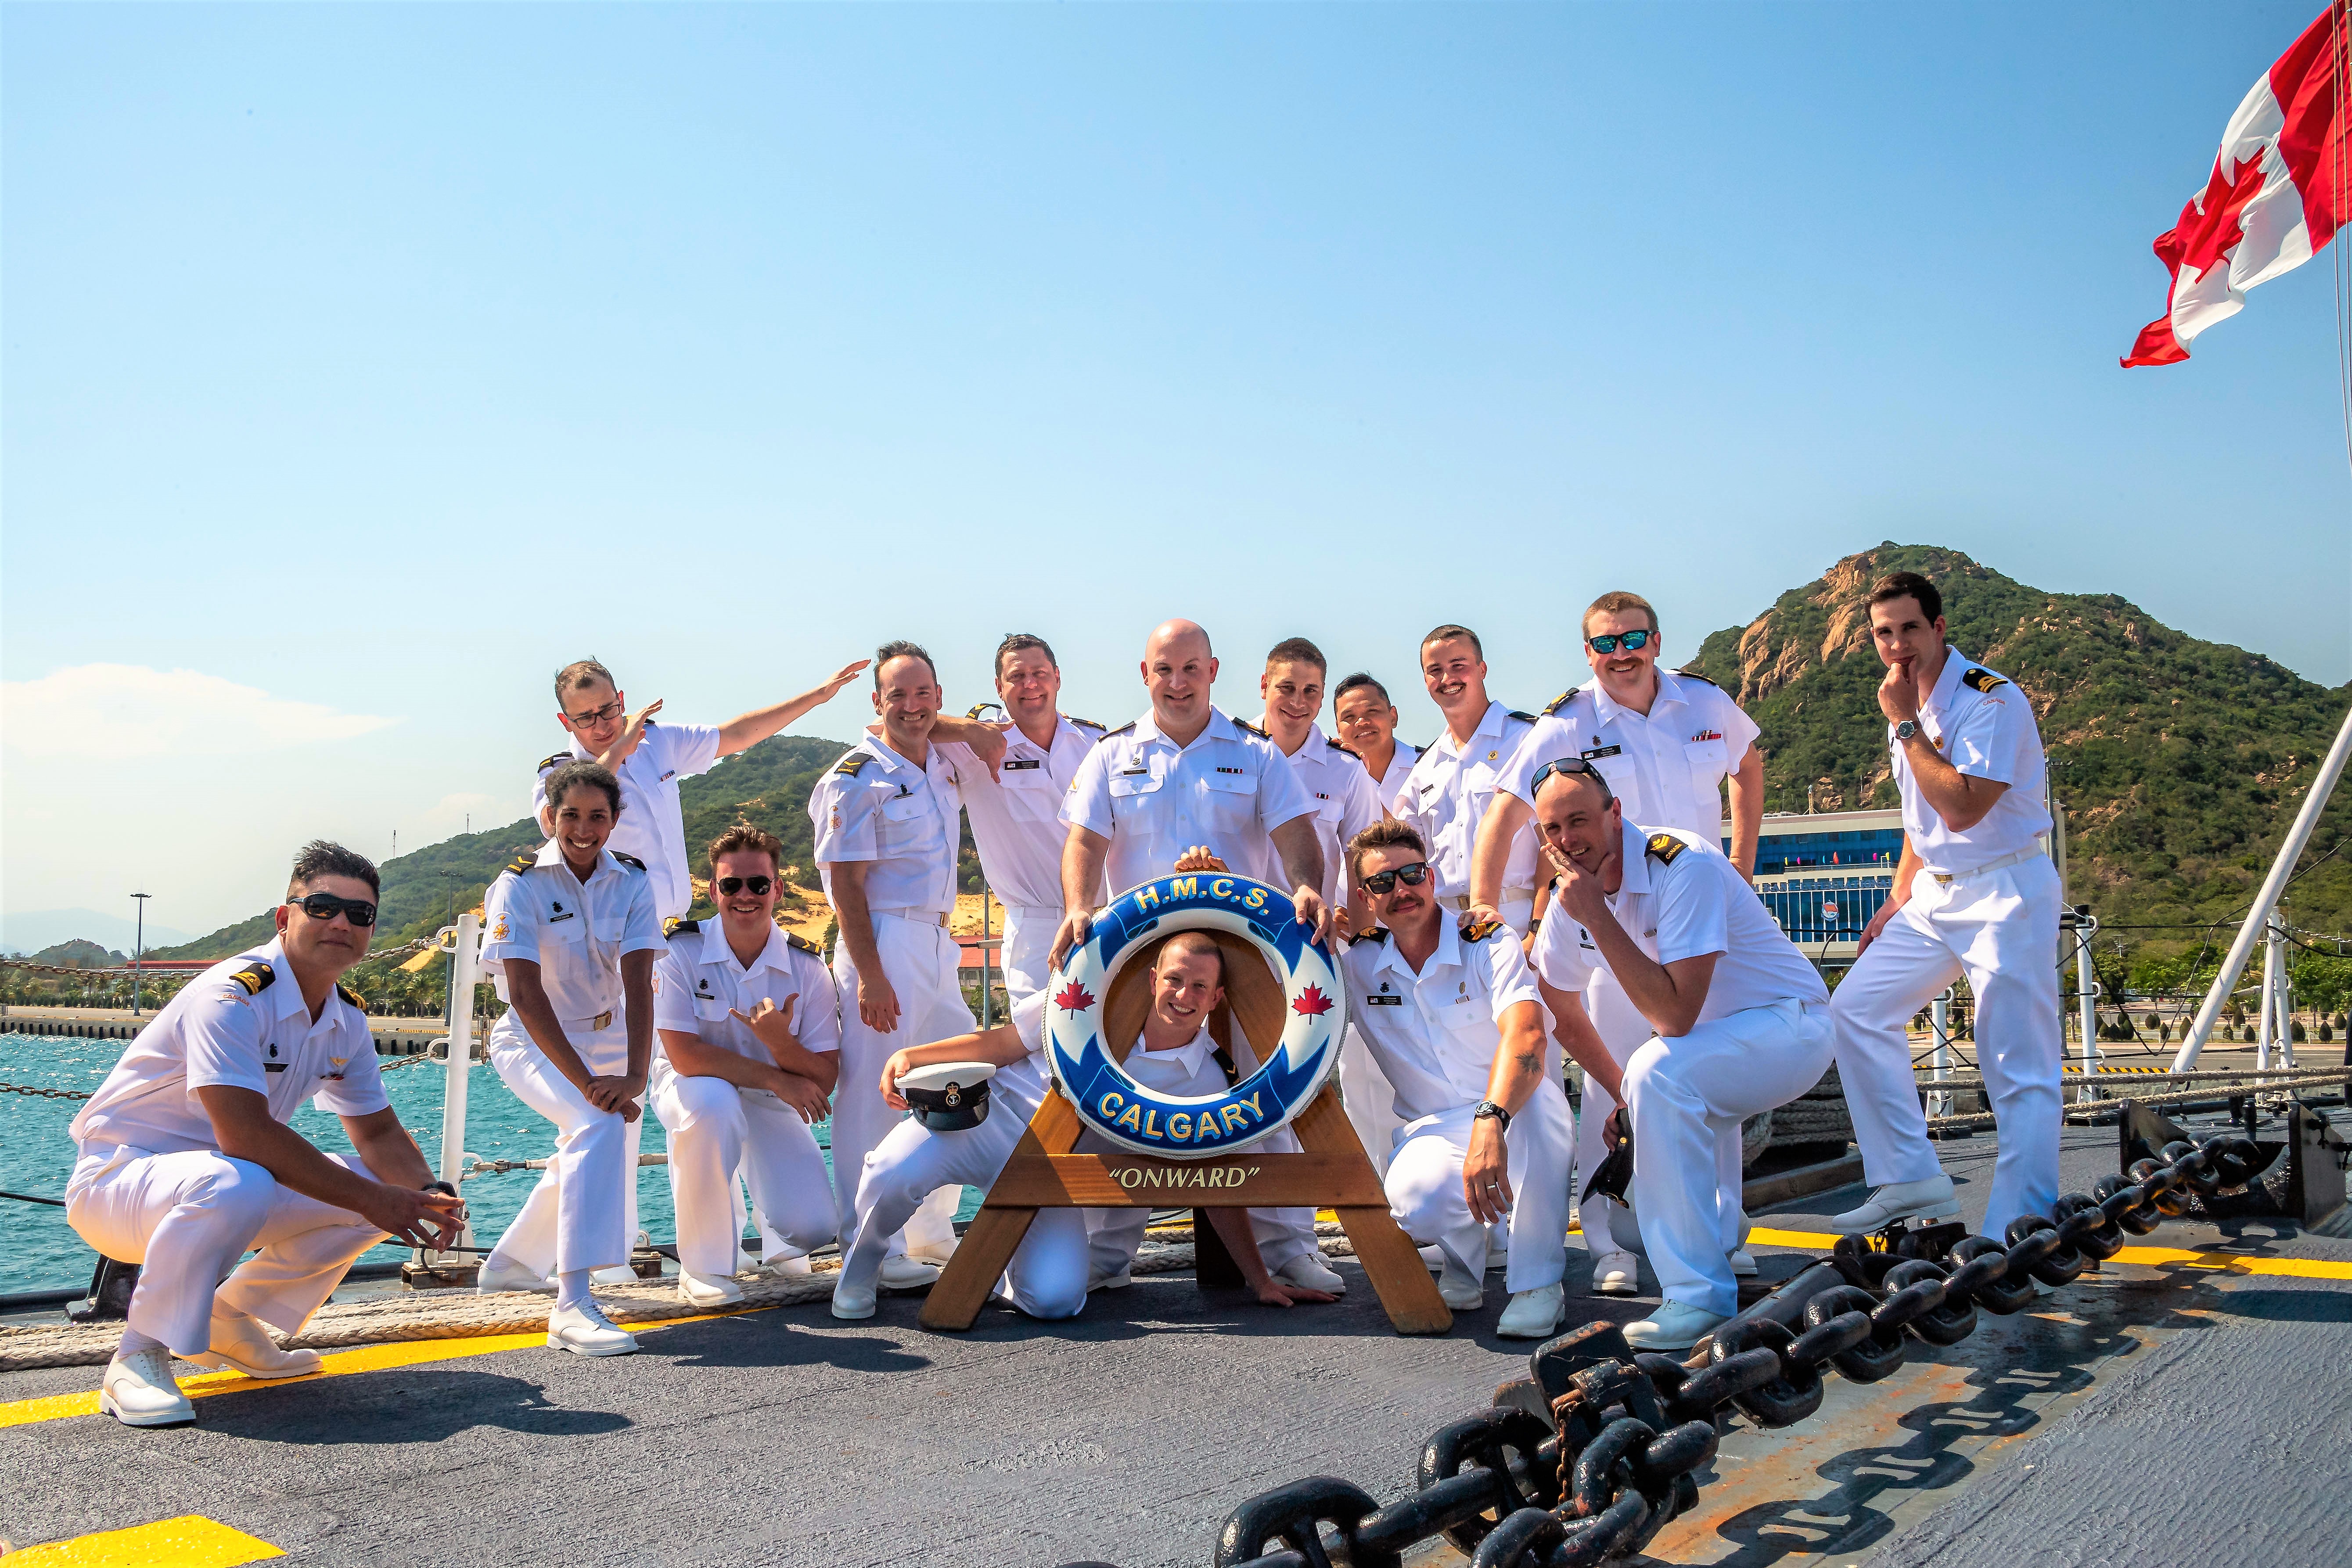 The HMCS Calgary 2021 Ship to Shore program volunteers took a group photo in Vietnam while deployed on Operation Projection in 2021.